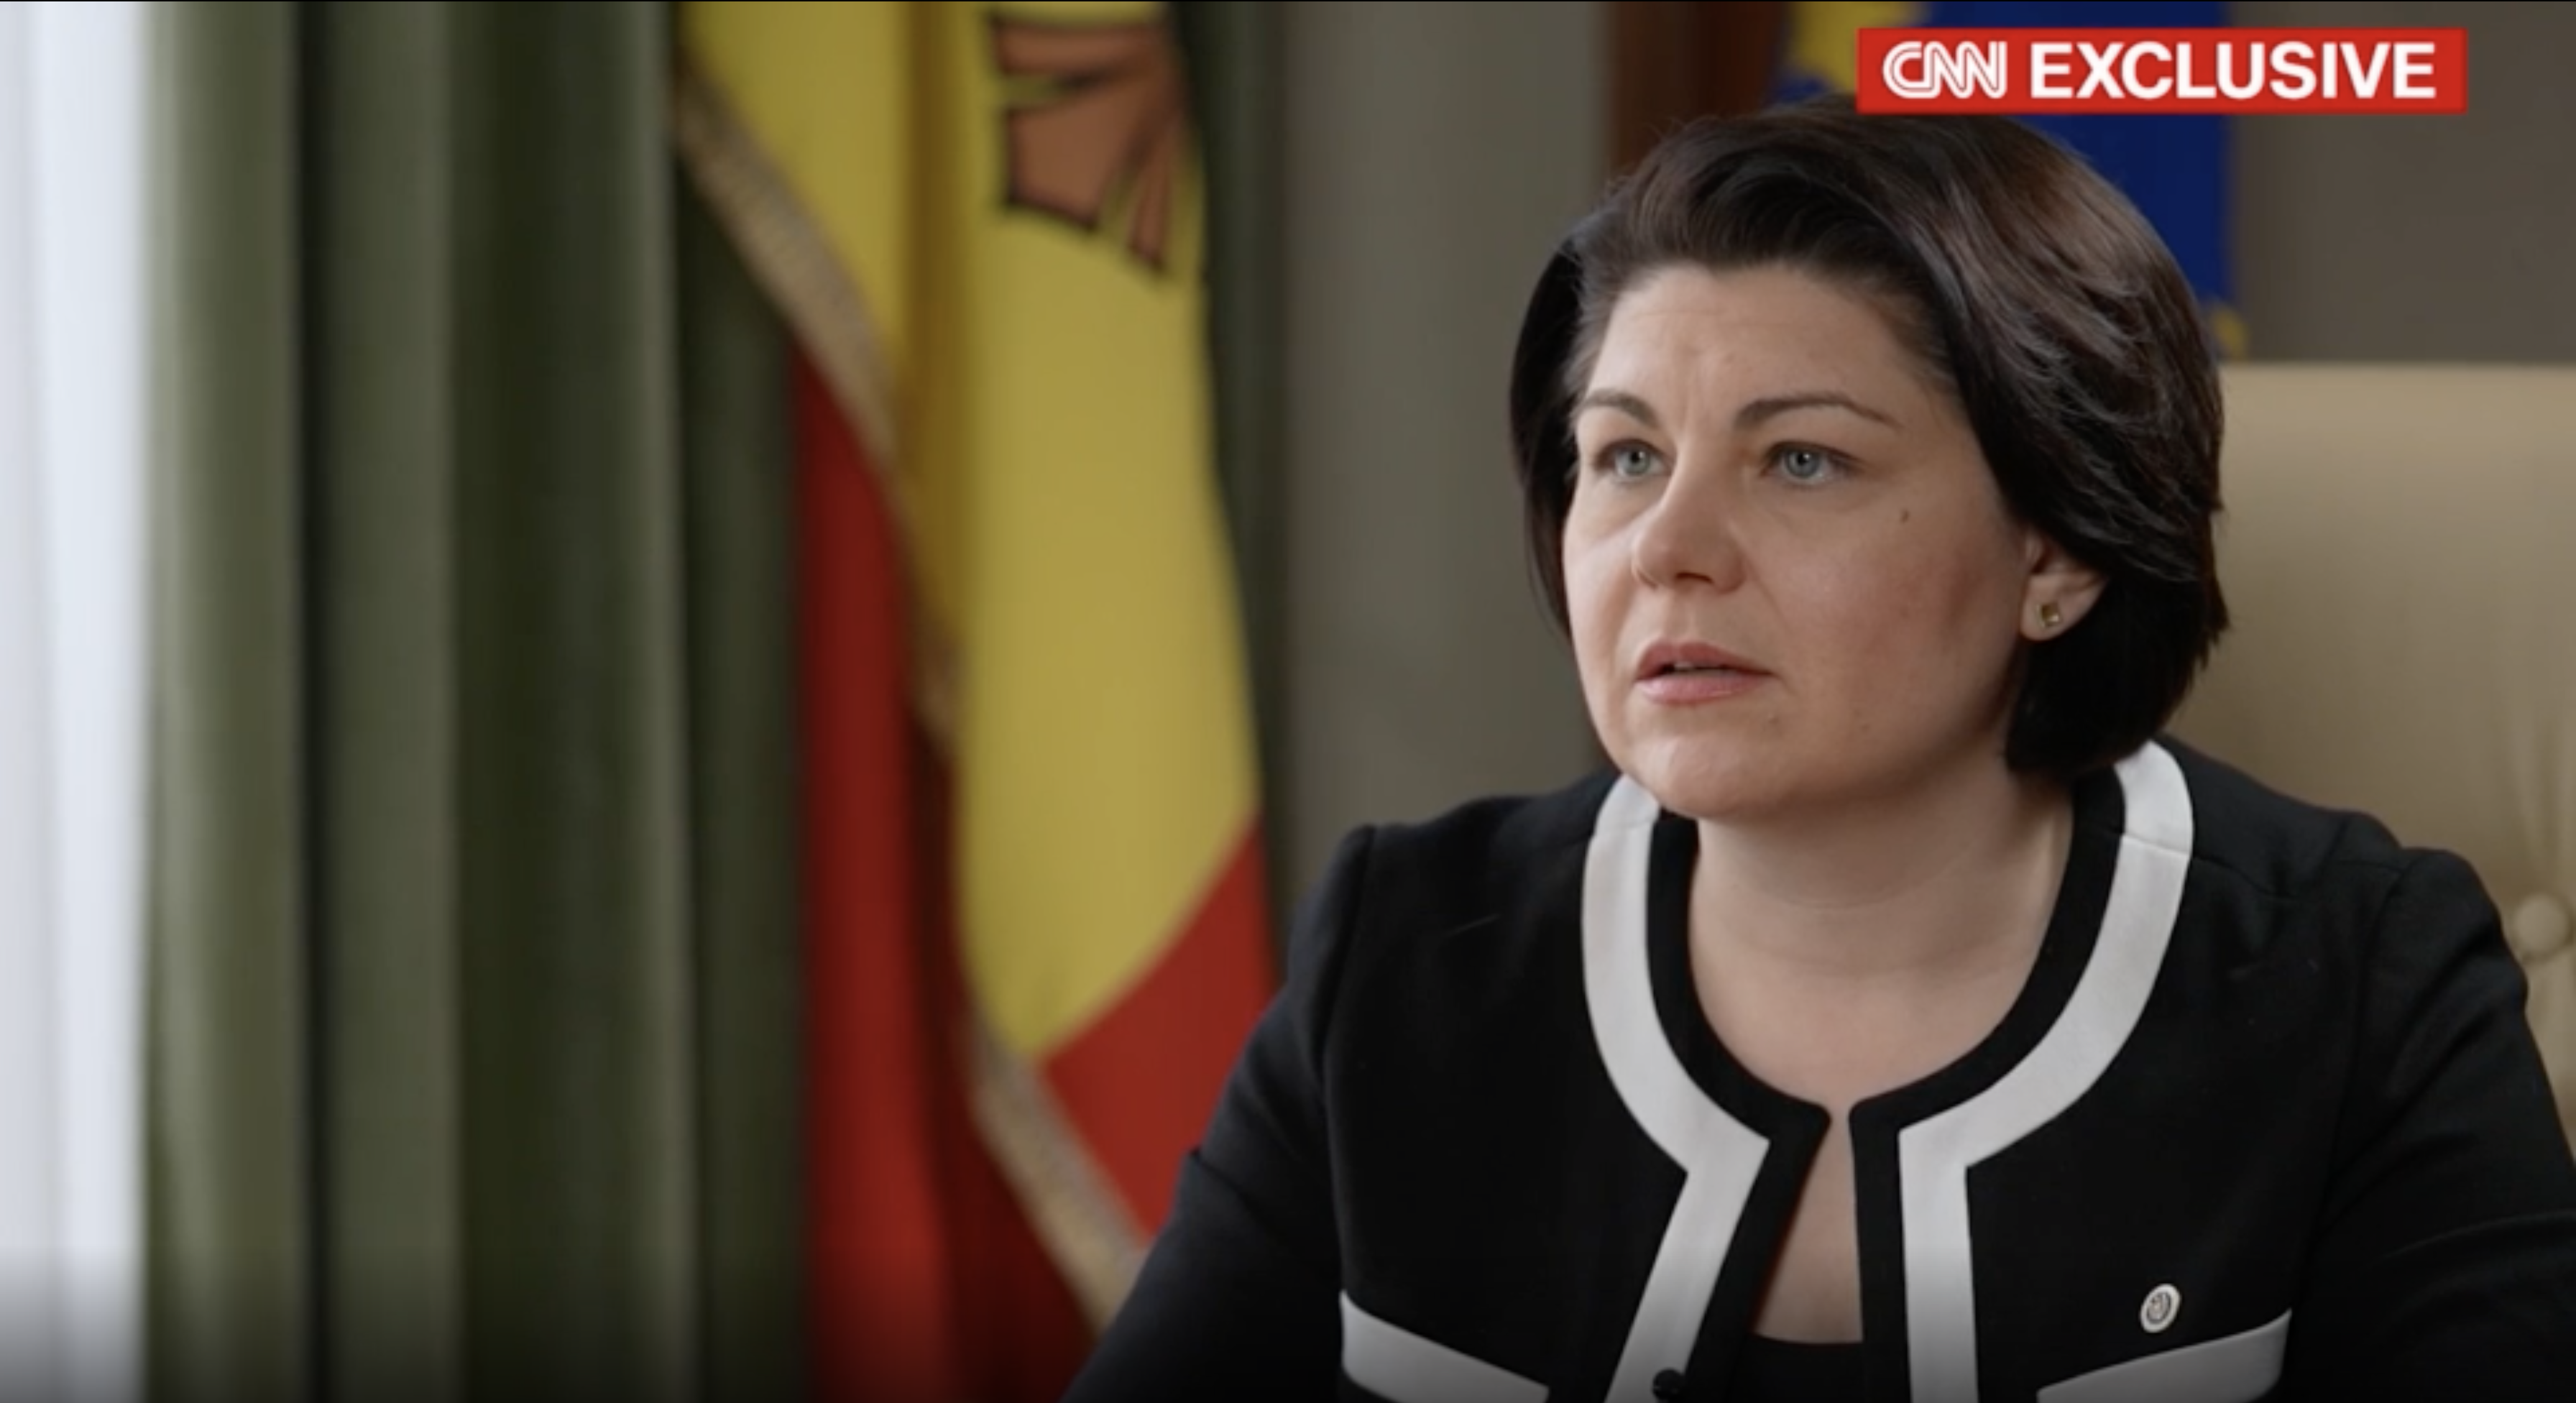 Moldovan Prime Minister Natalia Gavrilita gave an exclusive interview to CNN on Sunday, March 6.